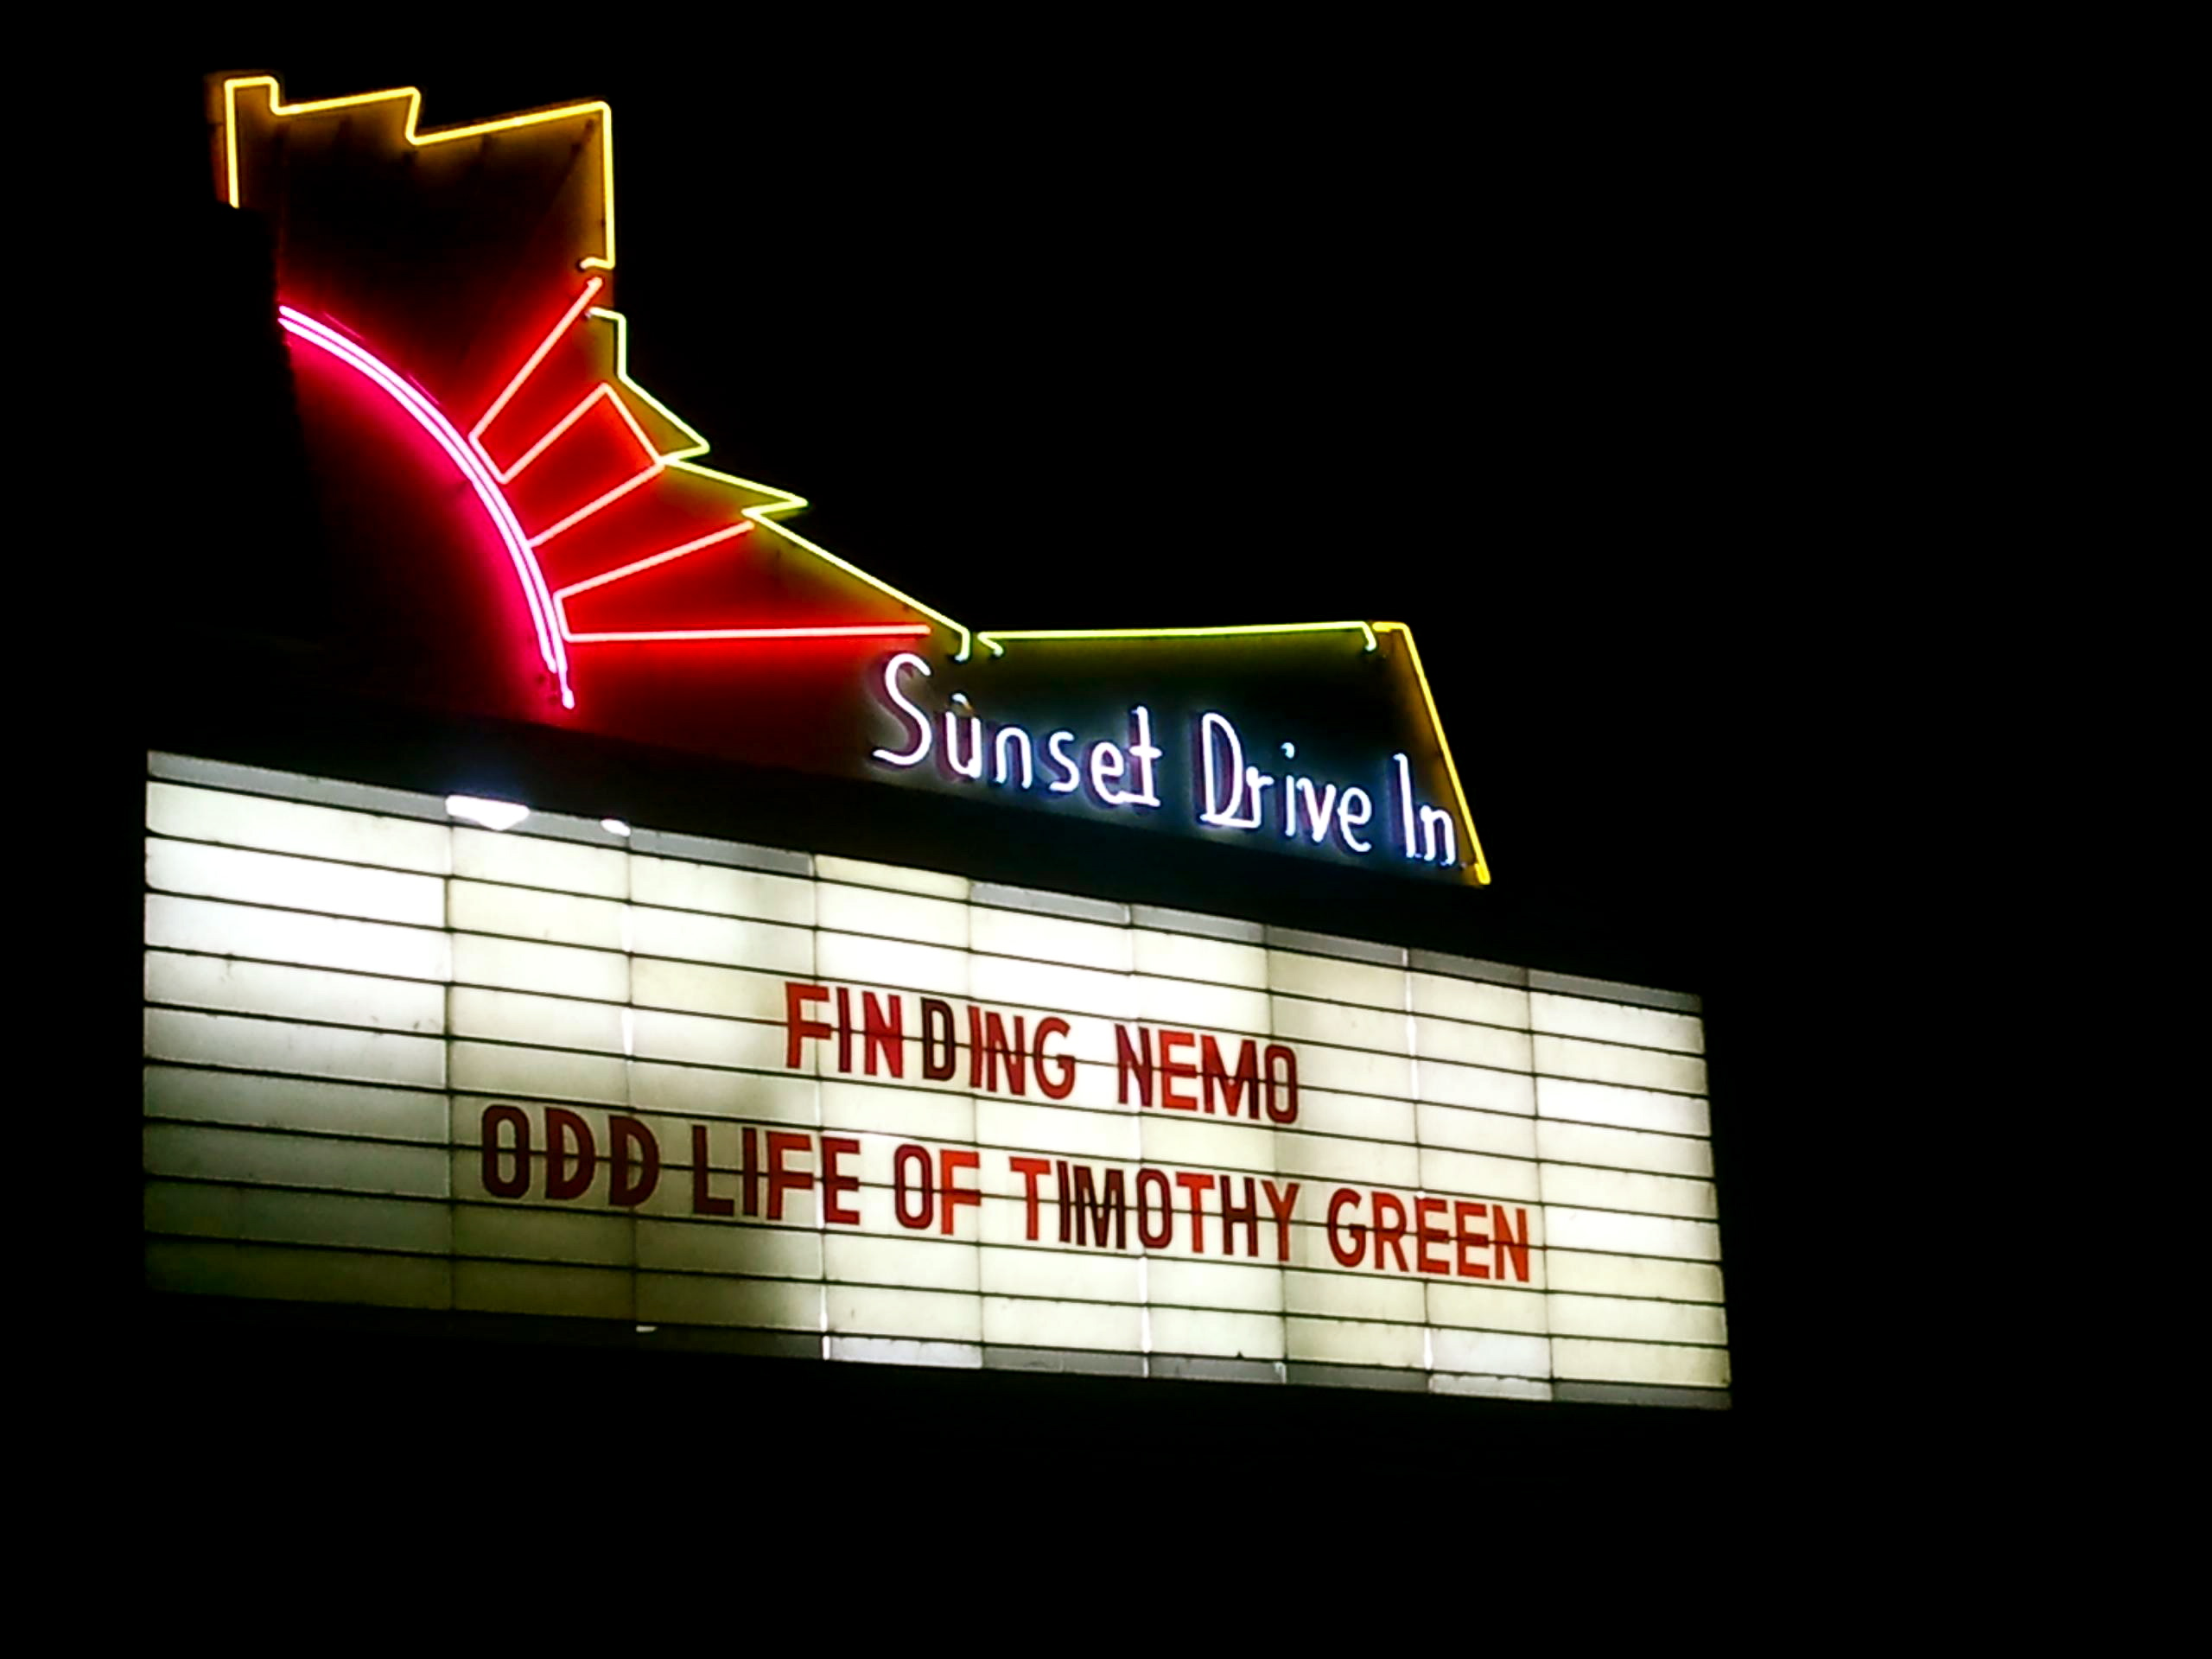 Image of neon Sunset Drive In sign.